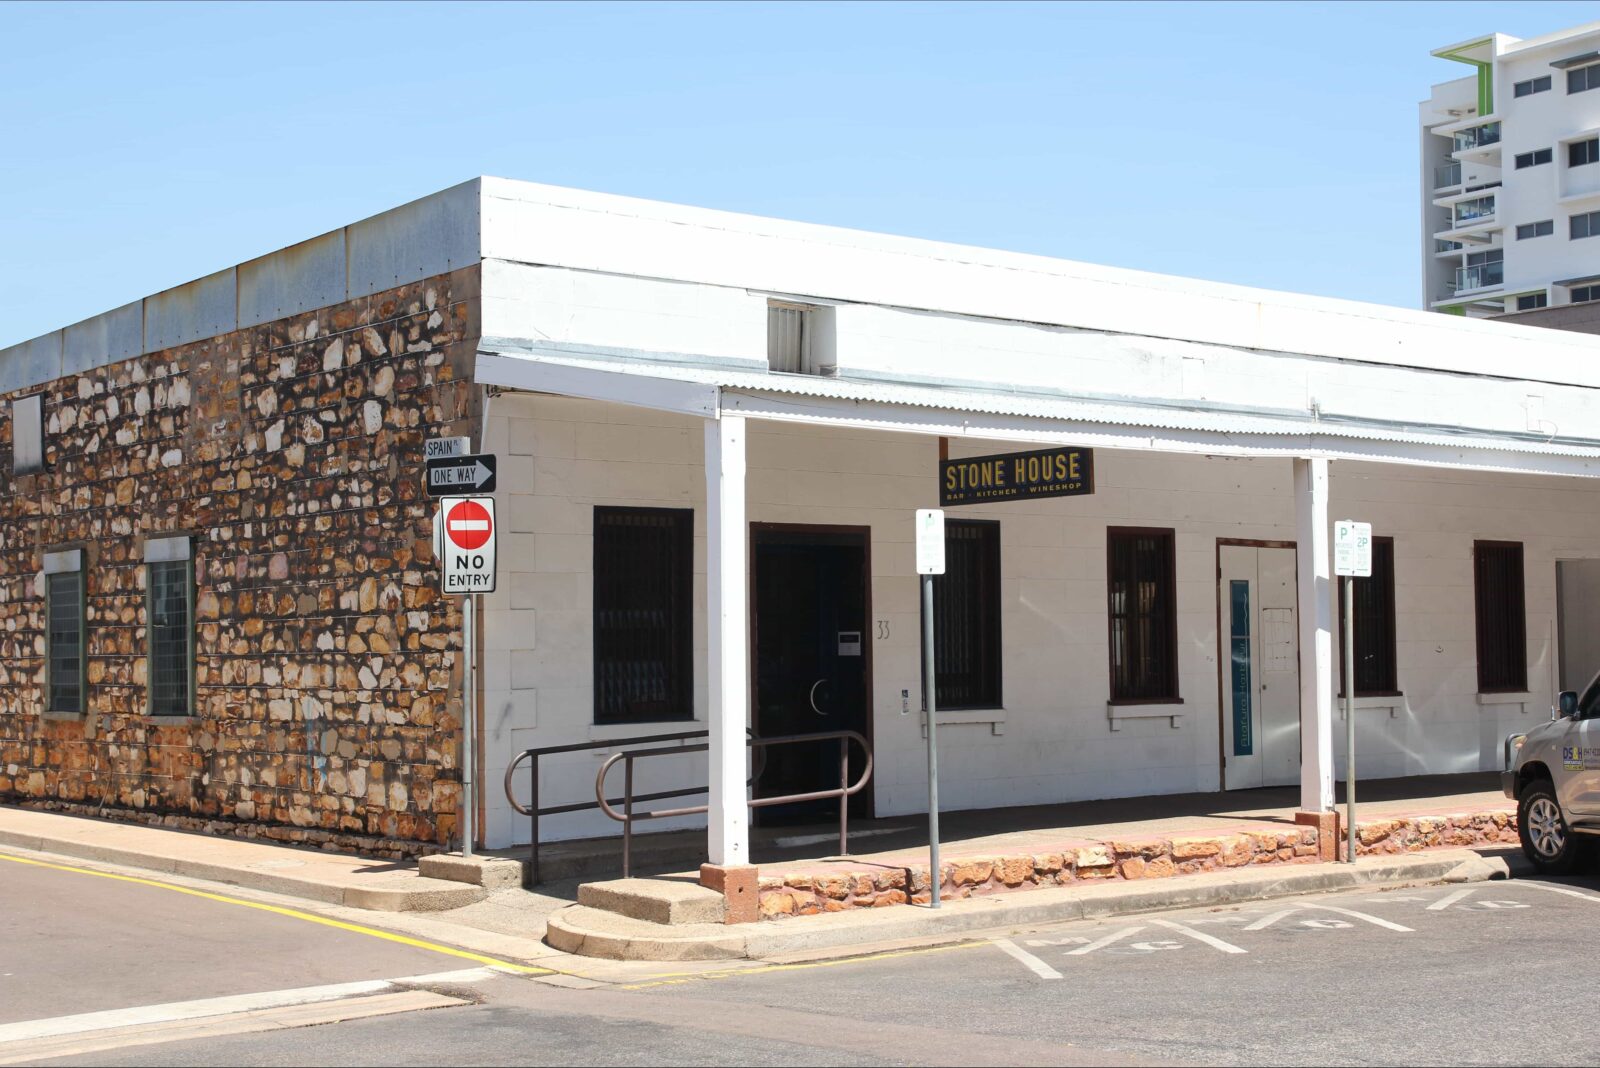 Sue Wah Chin building. Conservation works were recently undertaken to the front verandah.